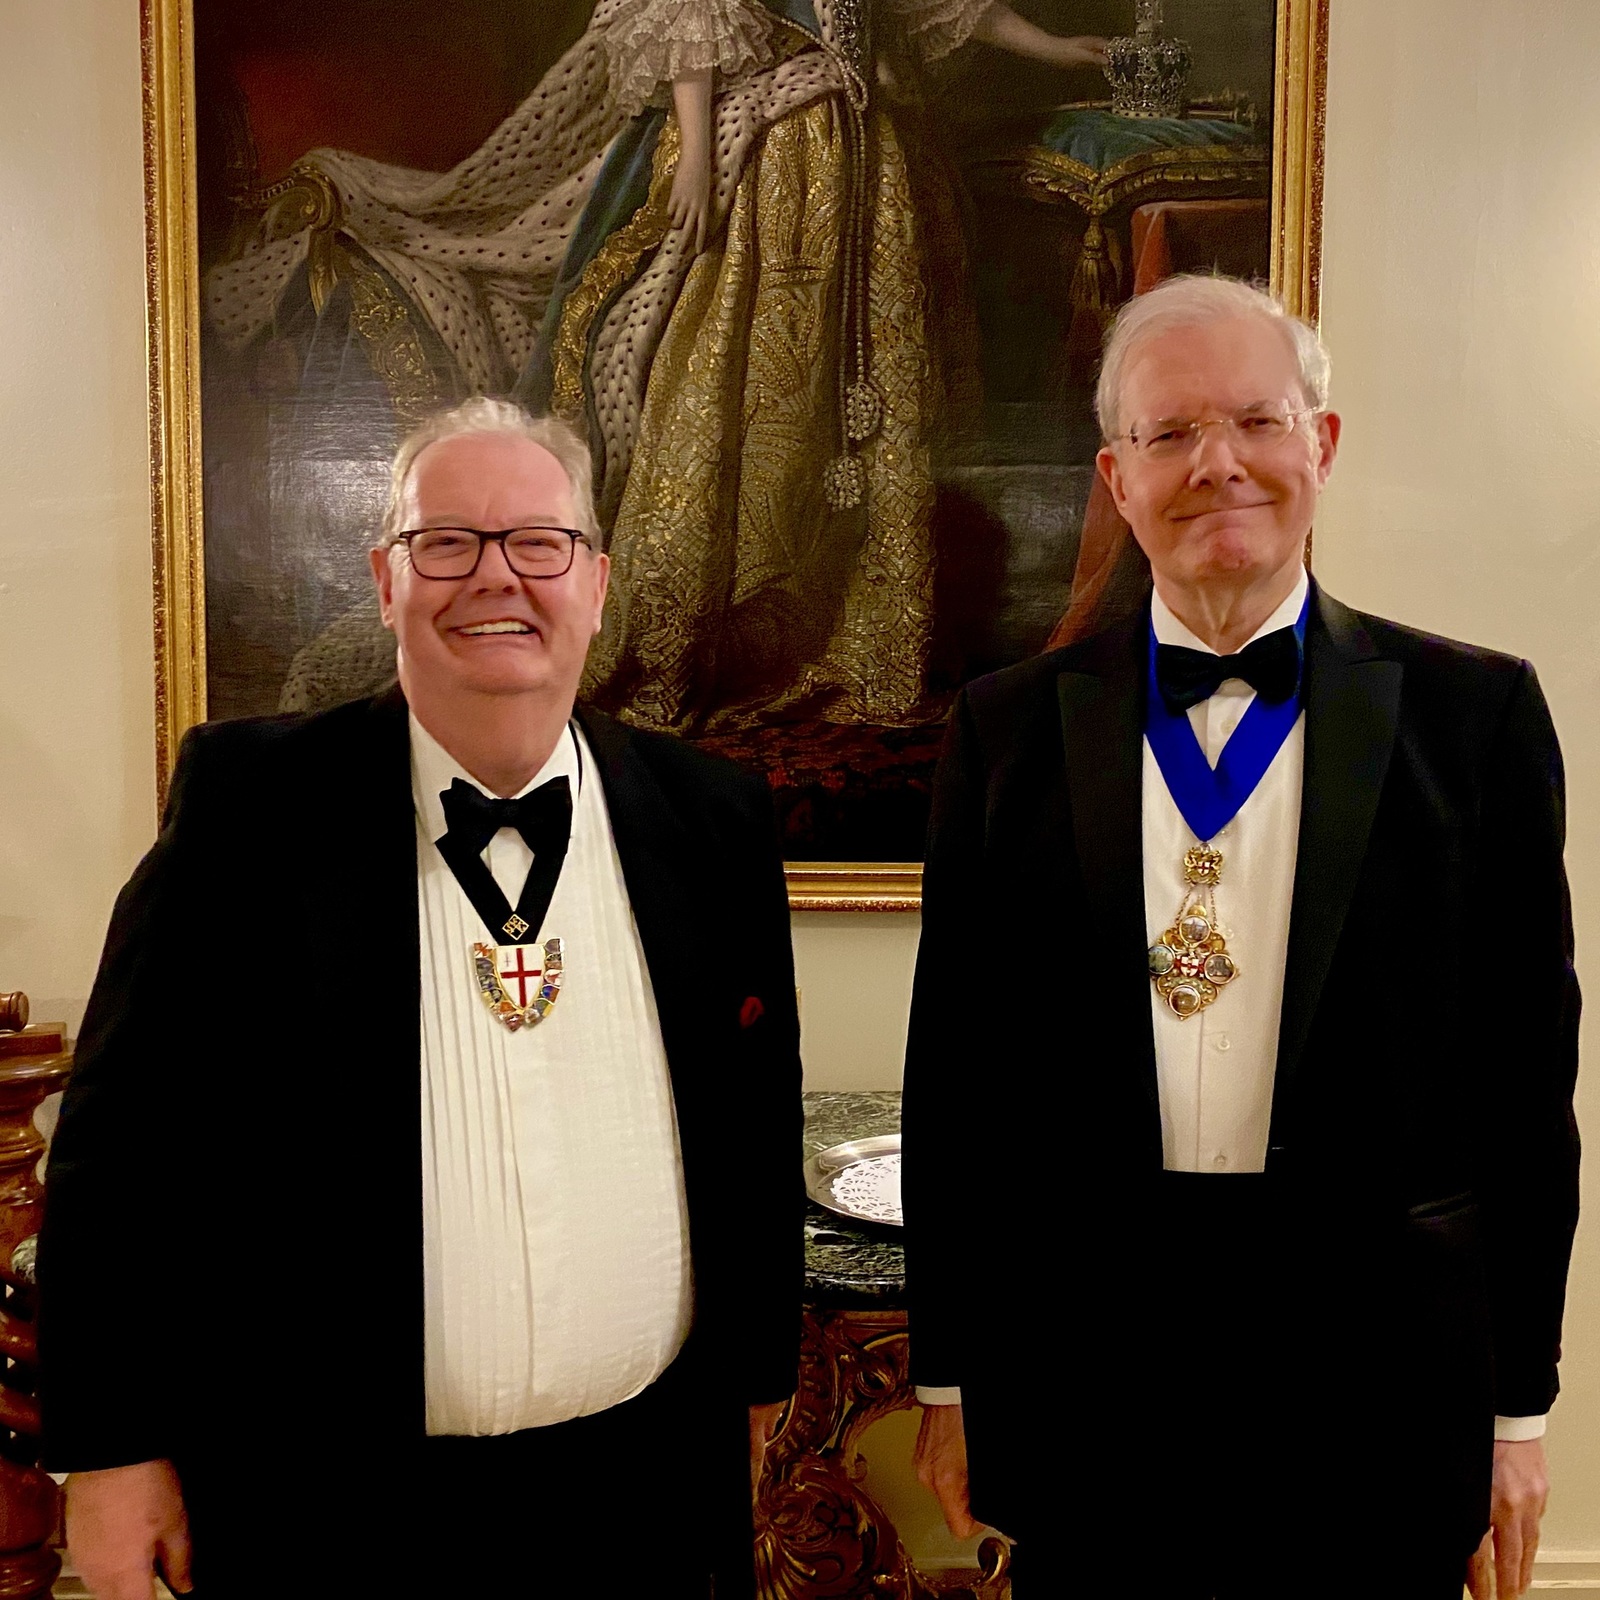 A fascinating evening at the Guild of Freemen with Master Alderman John Garbutt